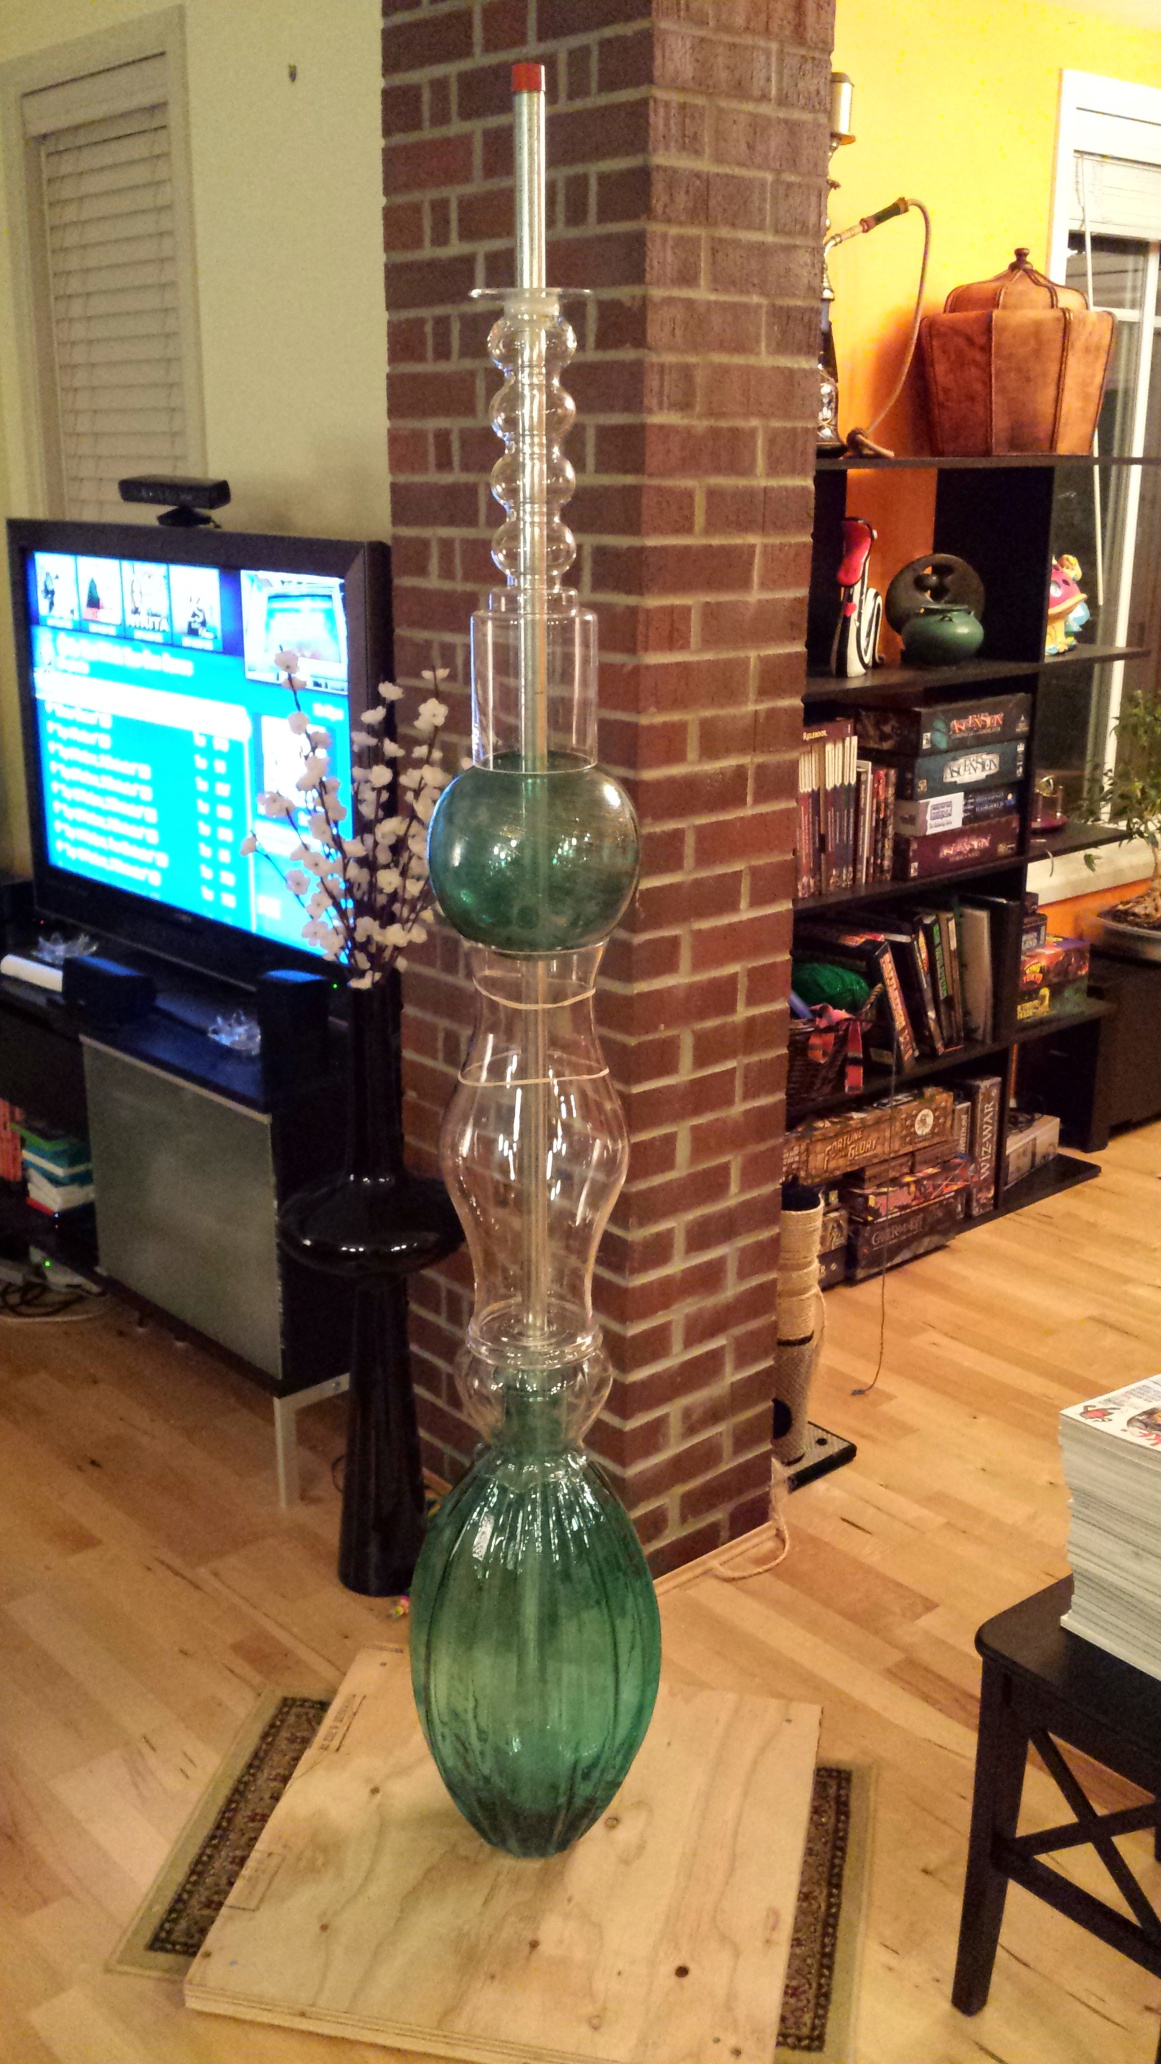 A square plywood base with a 6 foot tall metal rod pointing upward. A stack of glass vases rises around the pole.